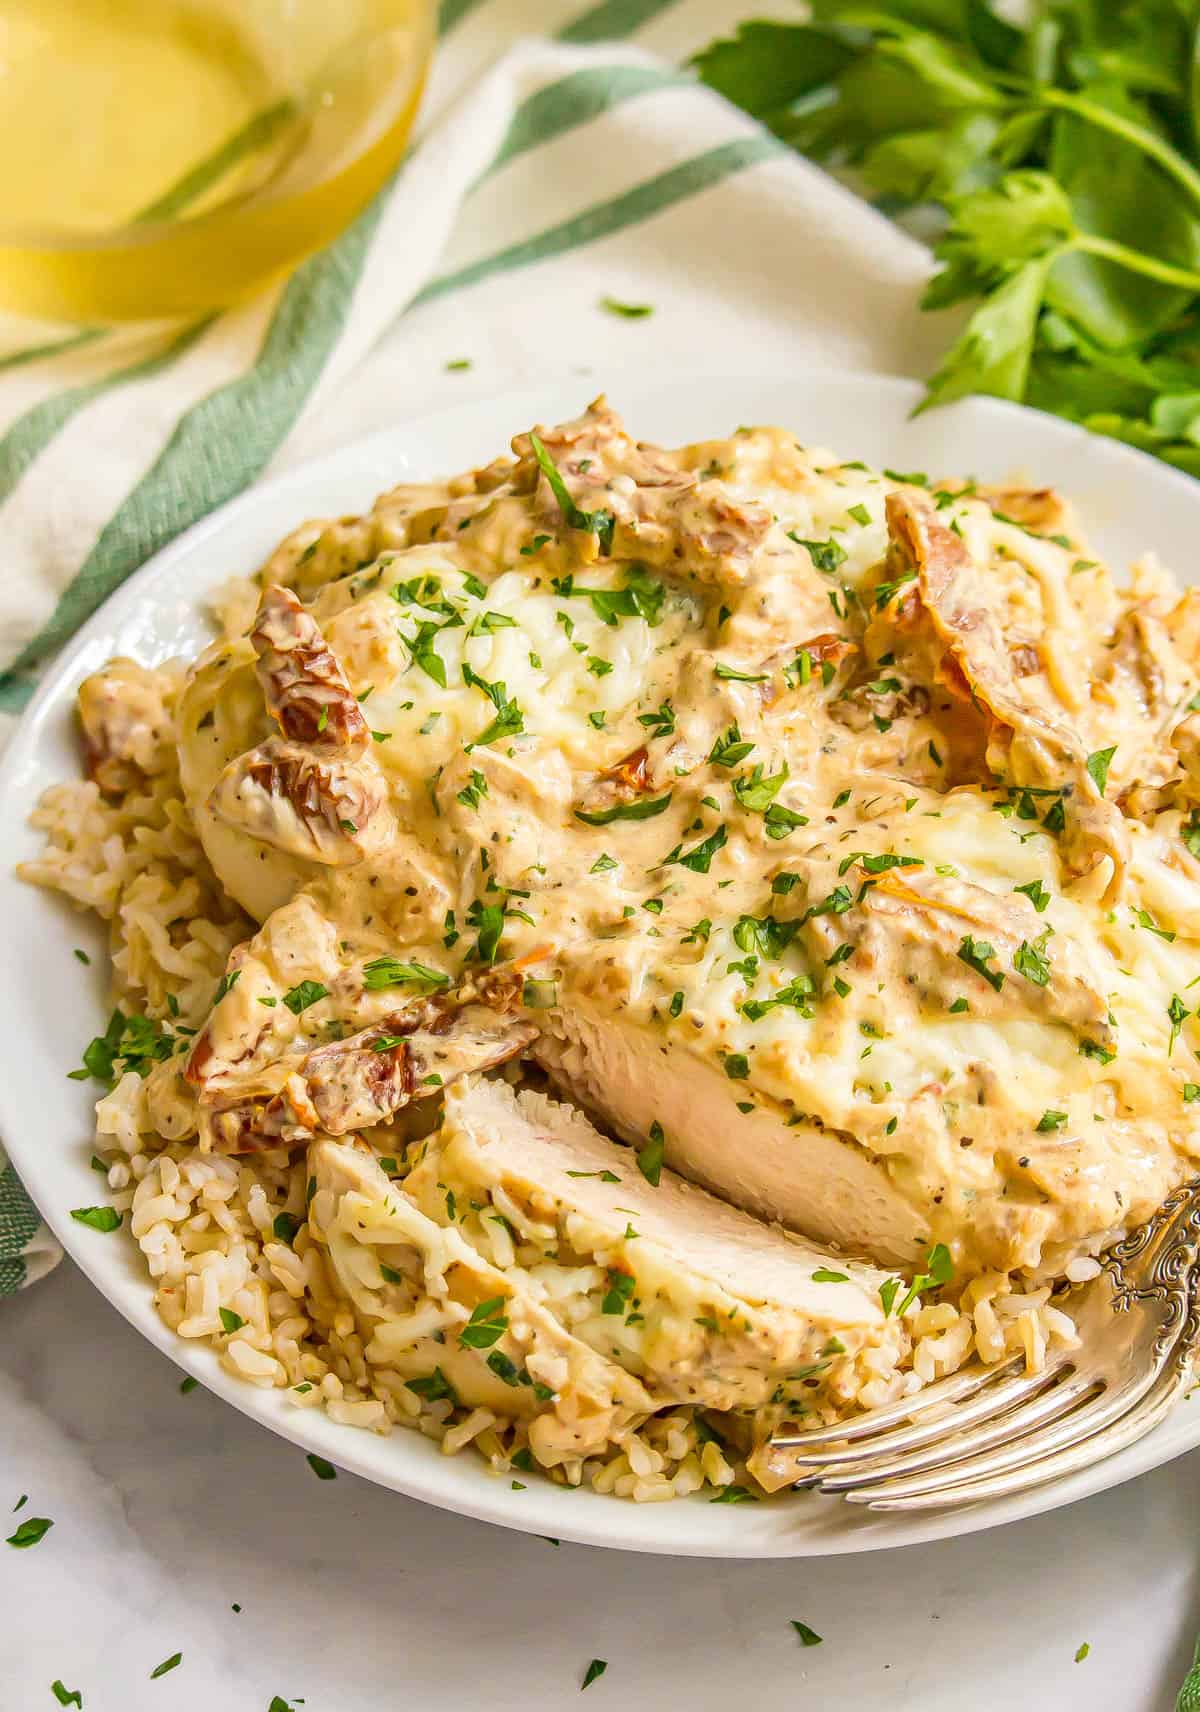 A fork resting on a white plate of a sliced creamy Italian chicken breast served over rice with parsley sprinkled on top.